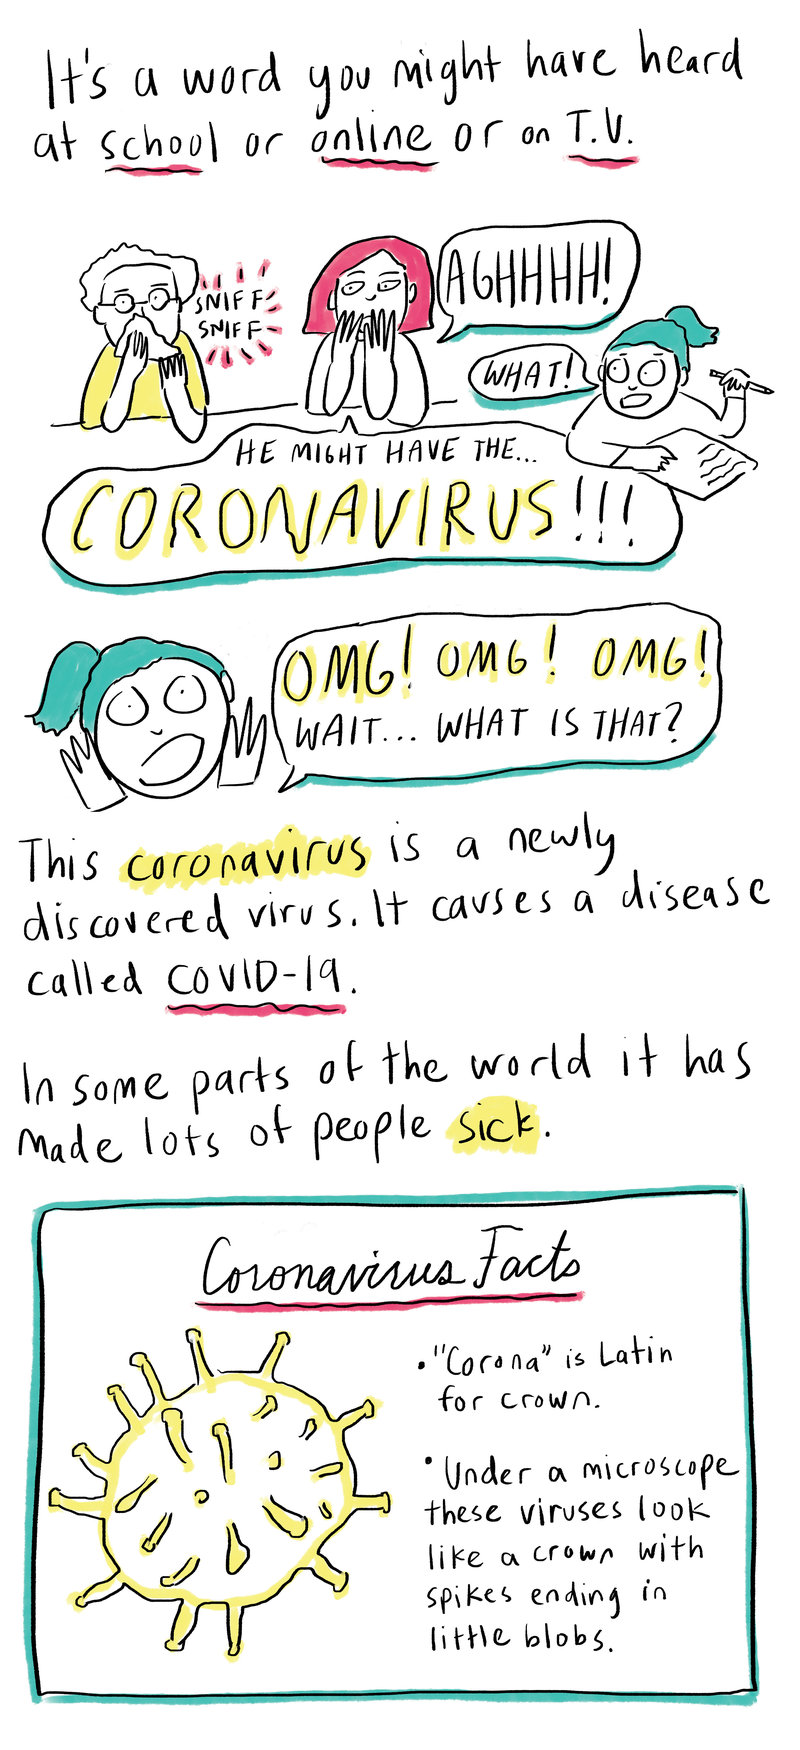 Covid comic from NPR - audio version can be found on the NPR website -Just For Kids: A Comic Exploring The New Coronavirus